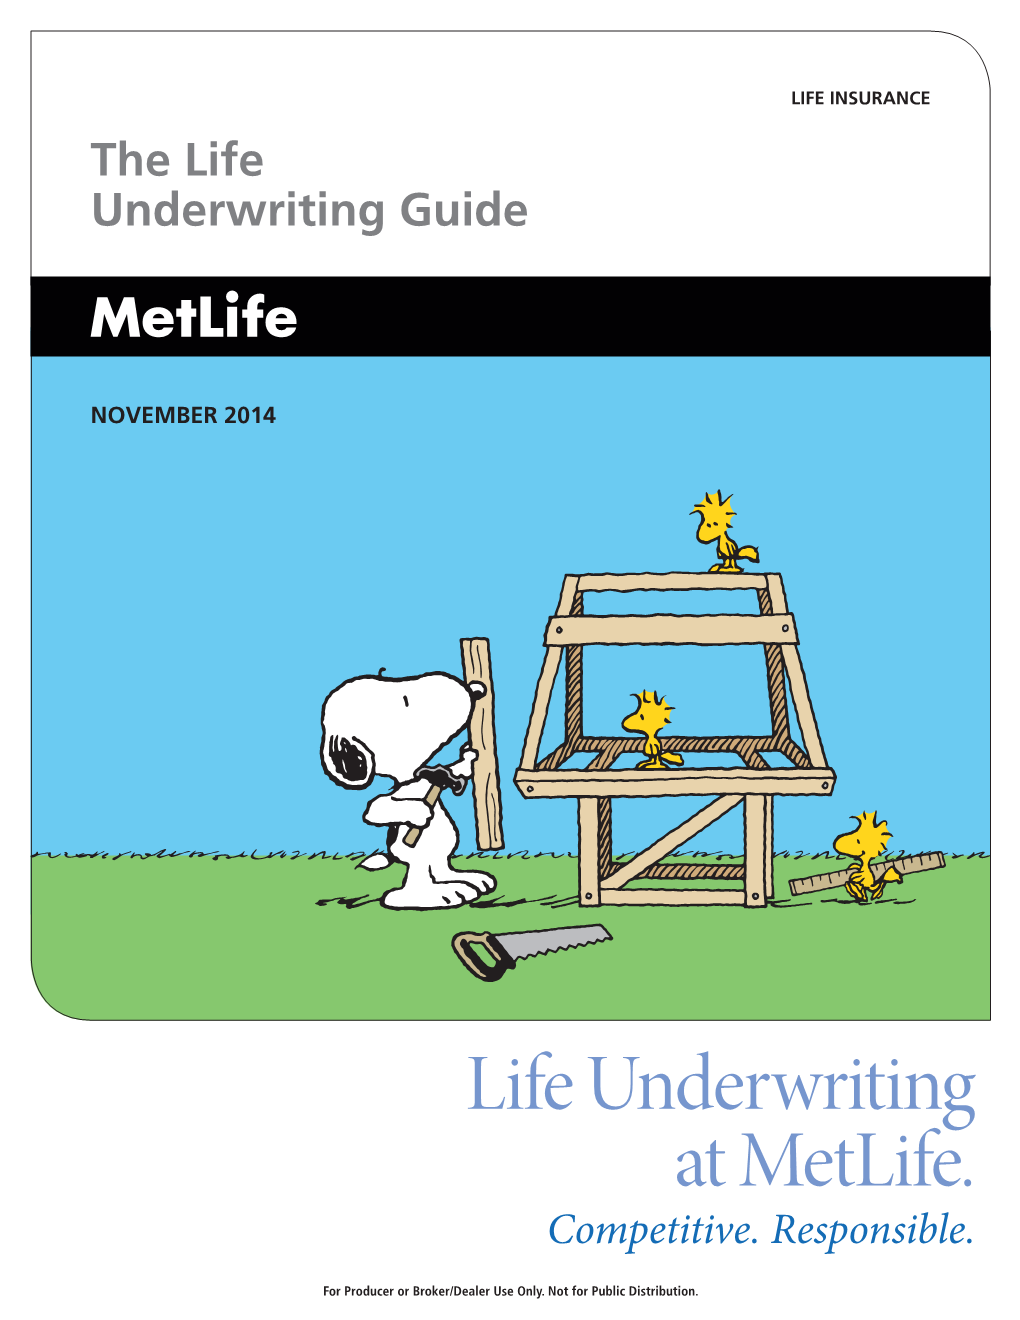 Life Underwriting at Metlife. Competitive